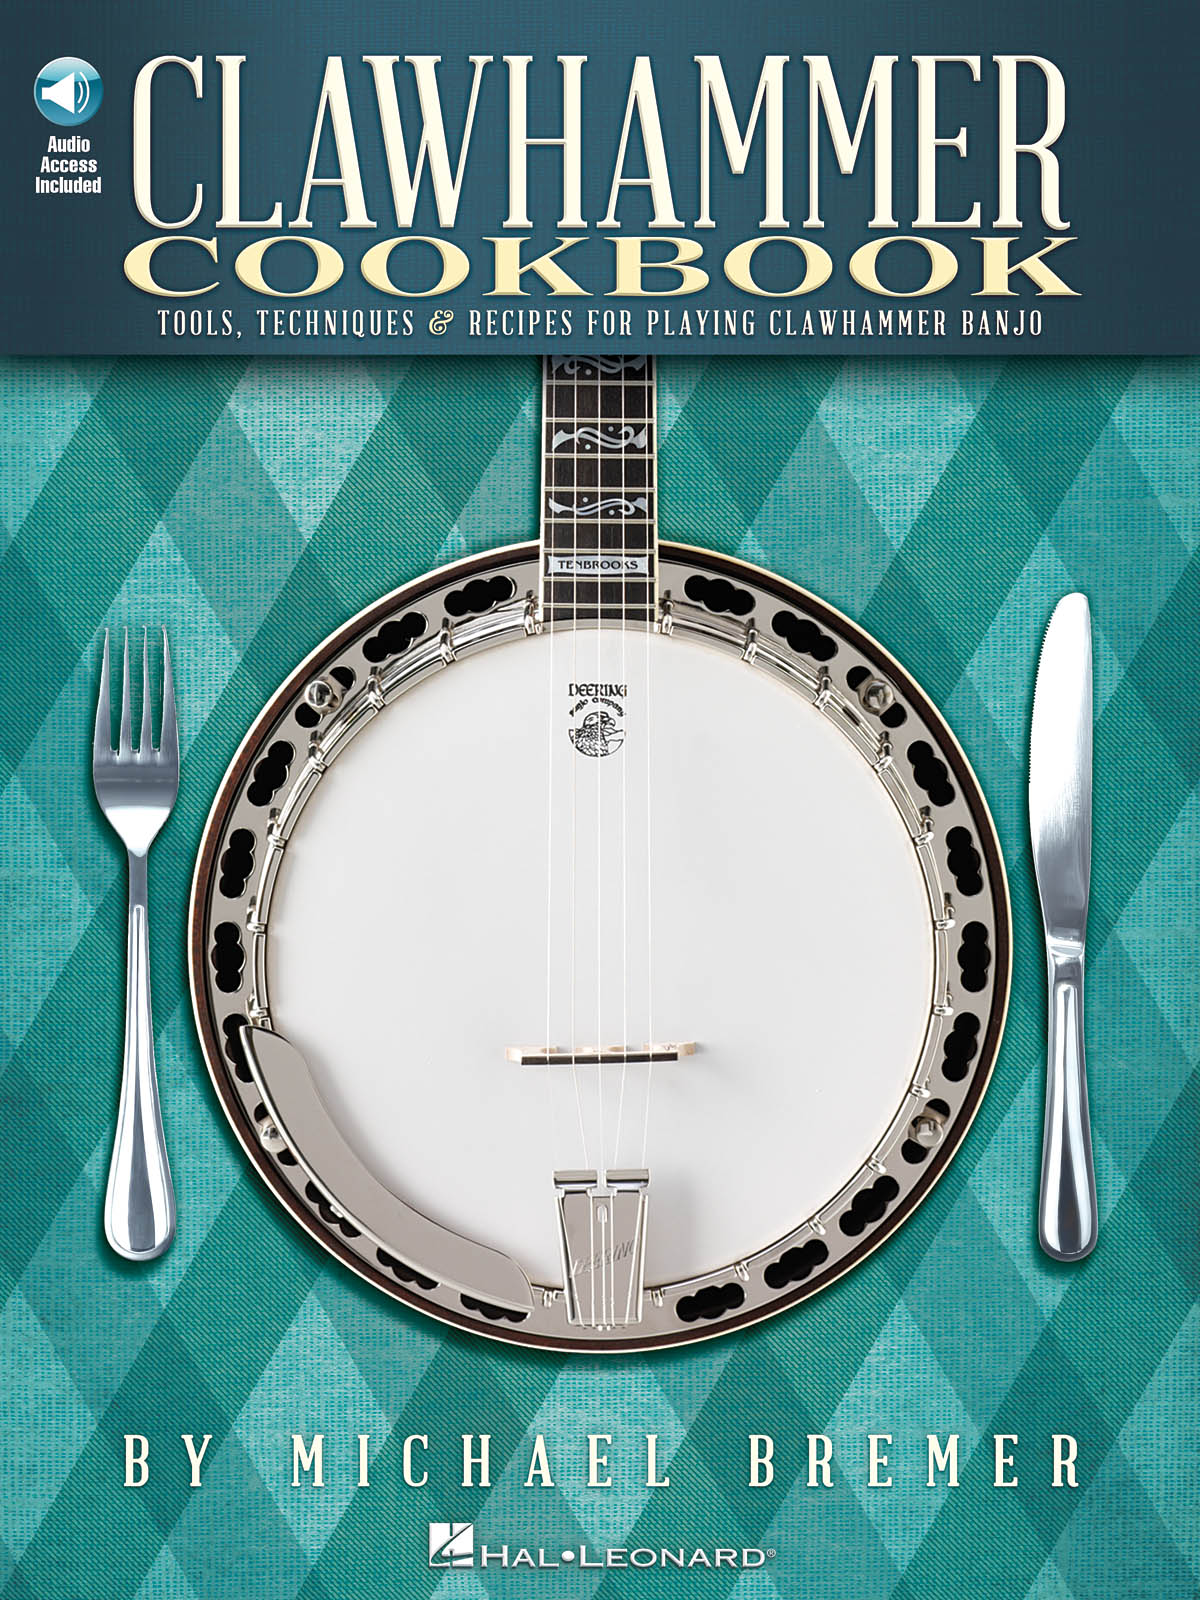 Clawhammer Cookbook - Tools, Techniques & Recipes for Playing Clawhammer Banjo - pro banjo